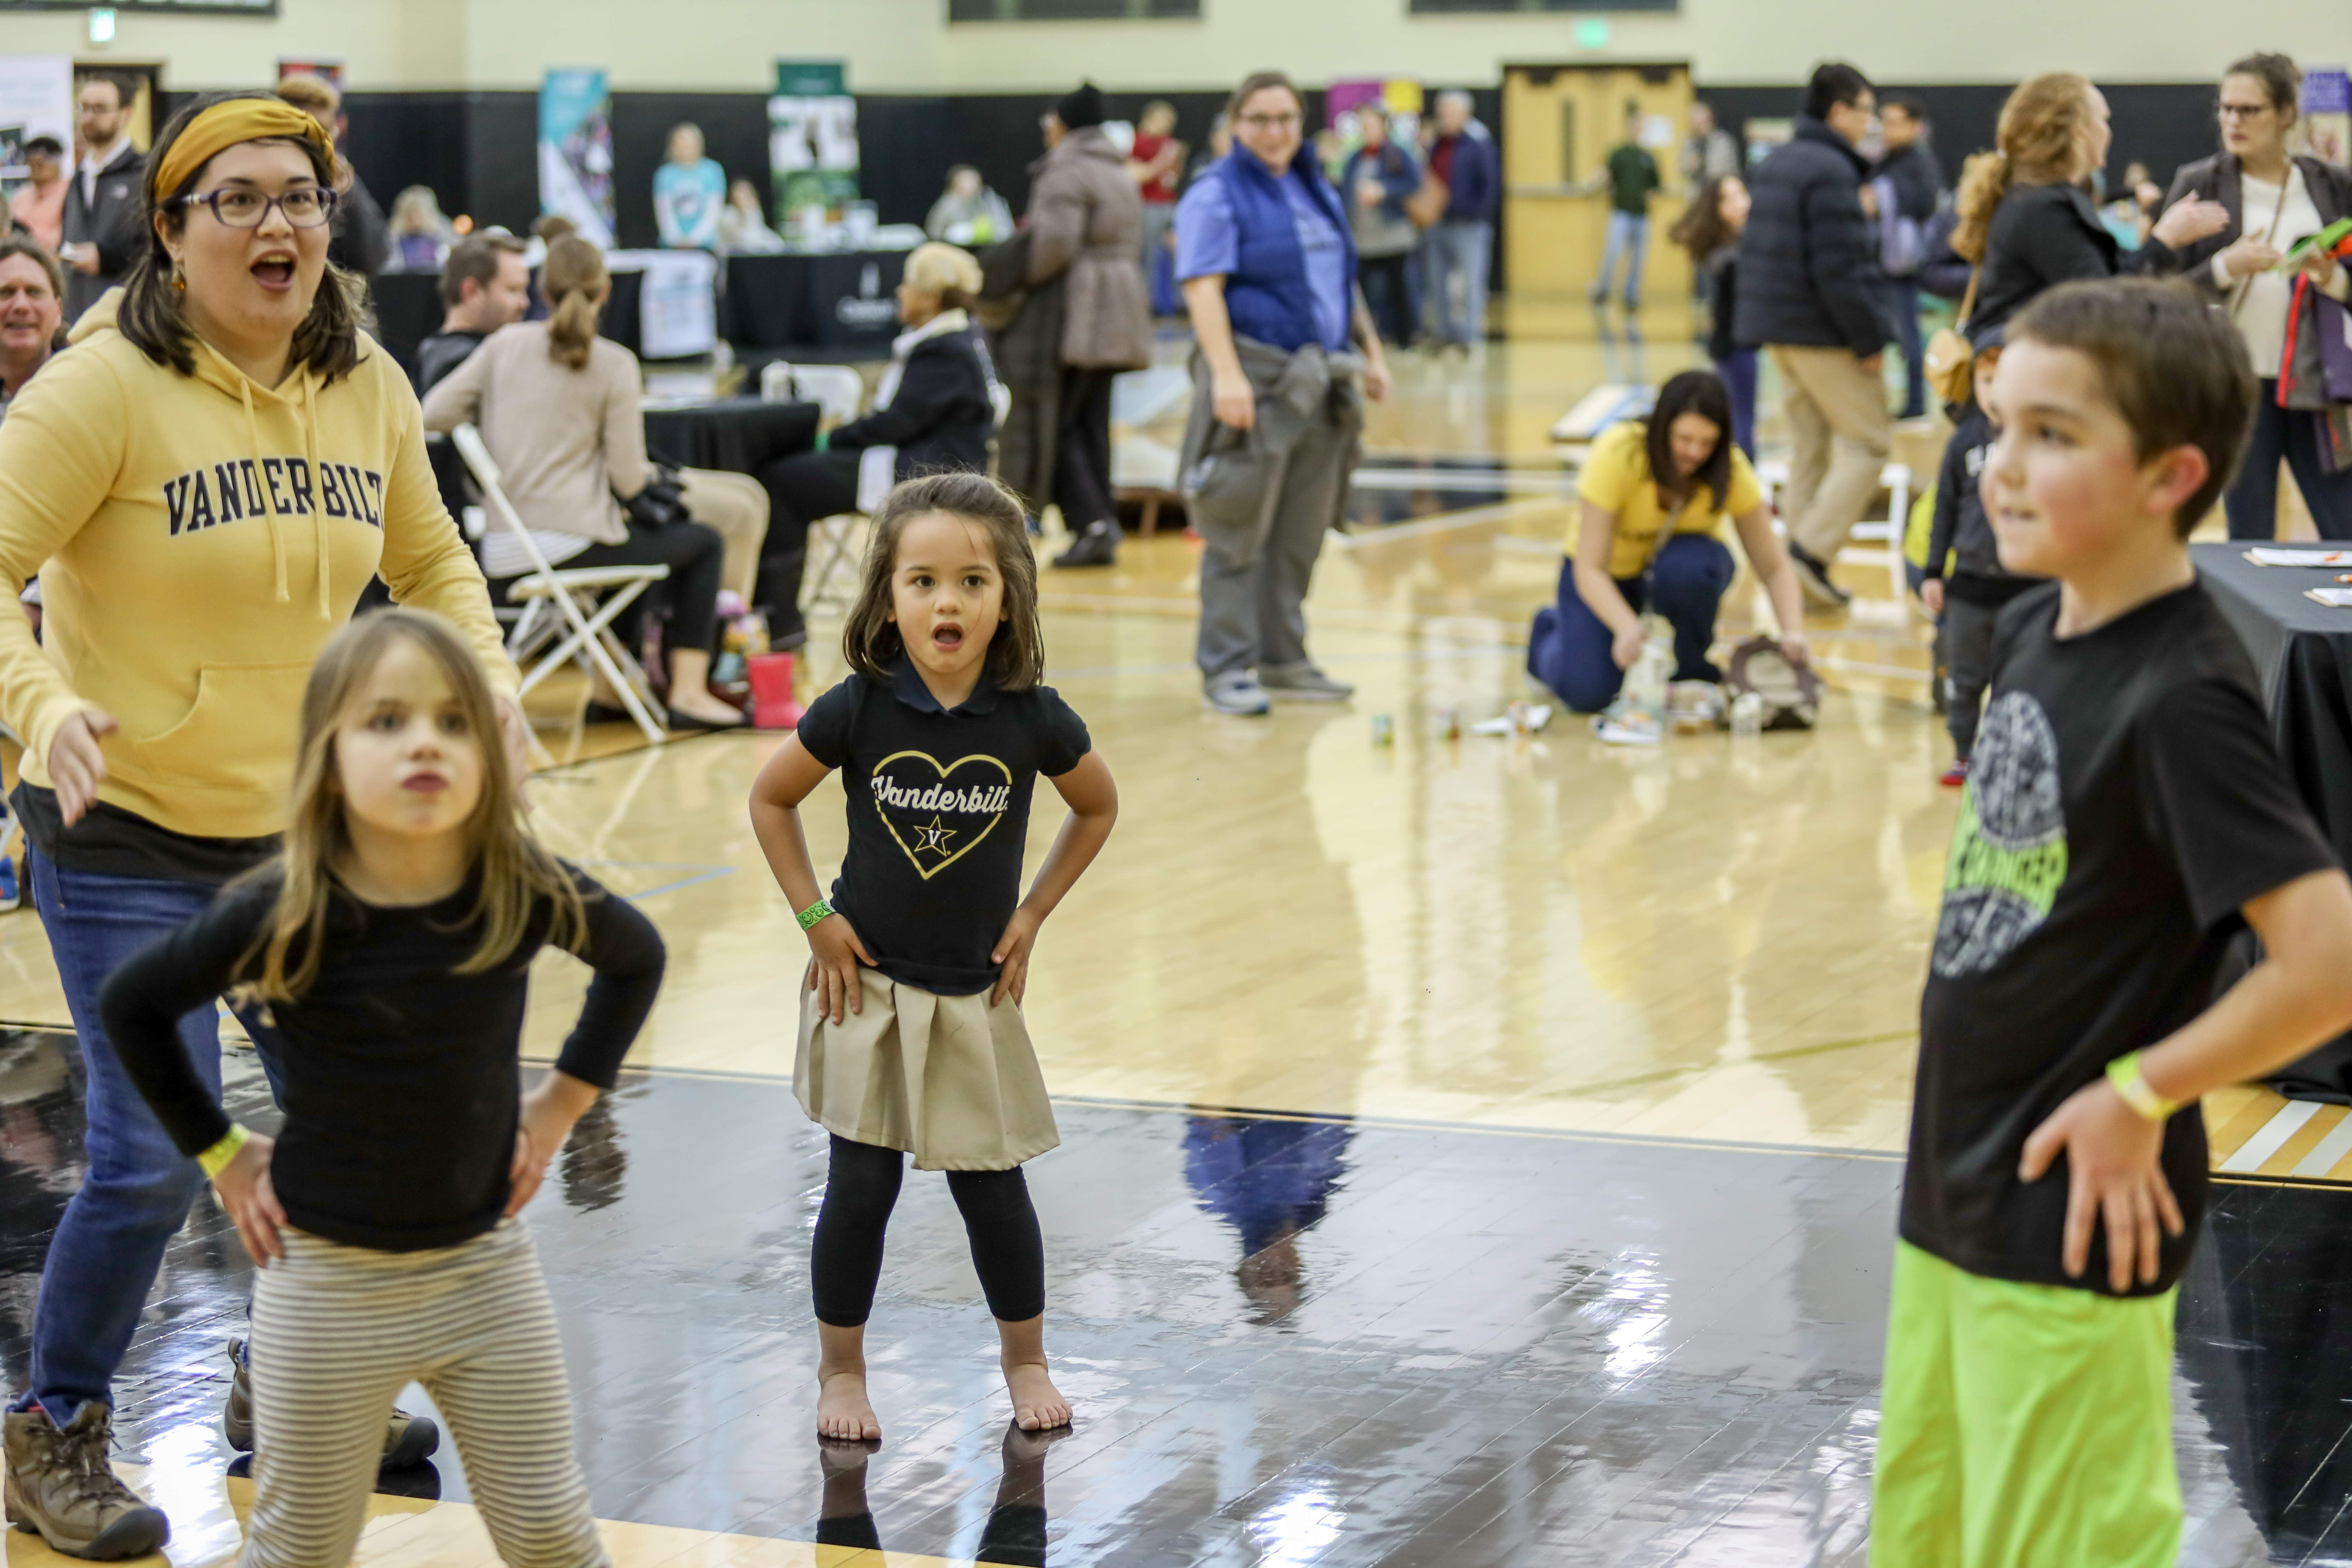 Family Fest, held in the Memorial Practice Gym, featured games, inflatables and other fun activities for Vanderbilt employees and their family members. (Vanderbilt University)